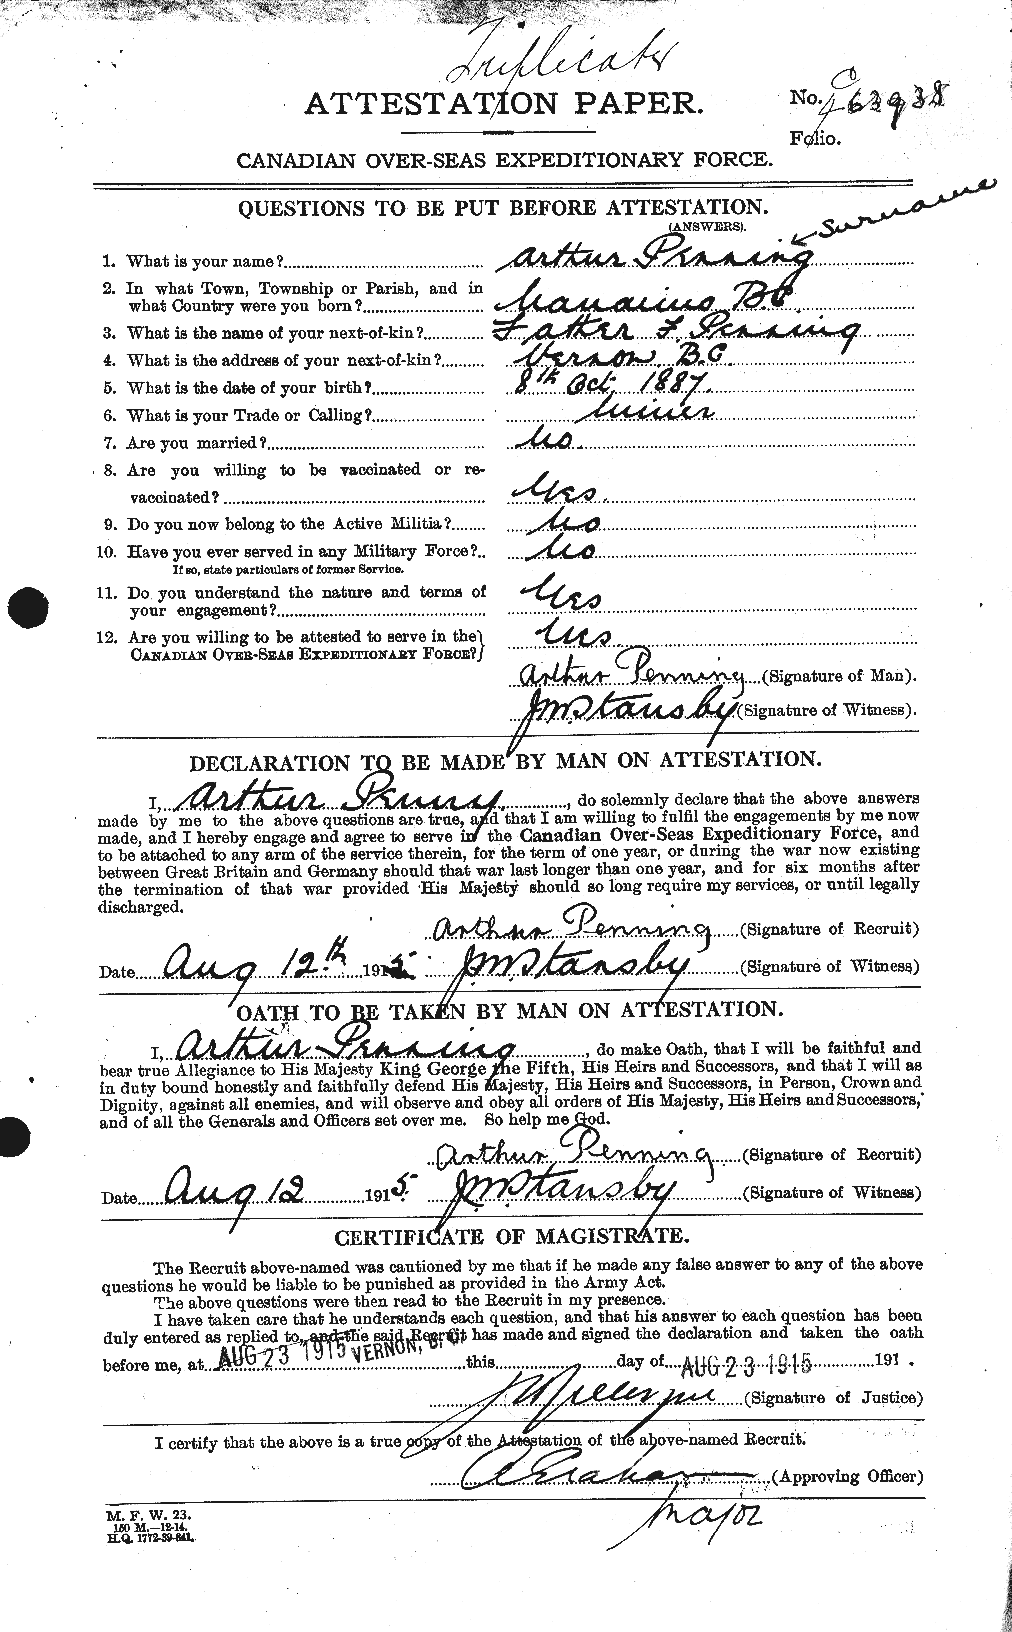 Personnel Records of the First World War - CEF 573198a